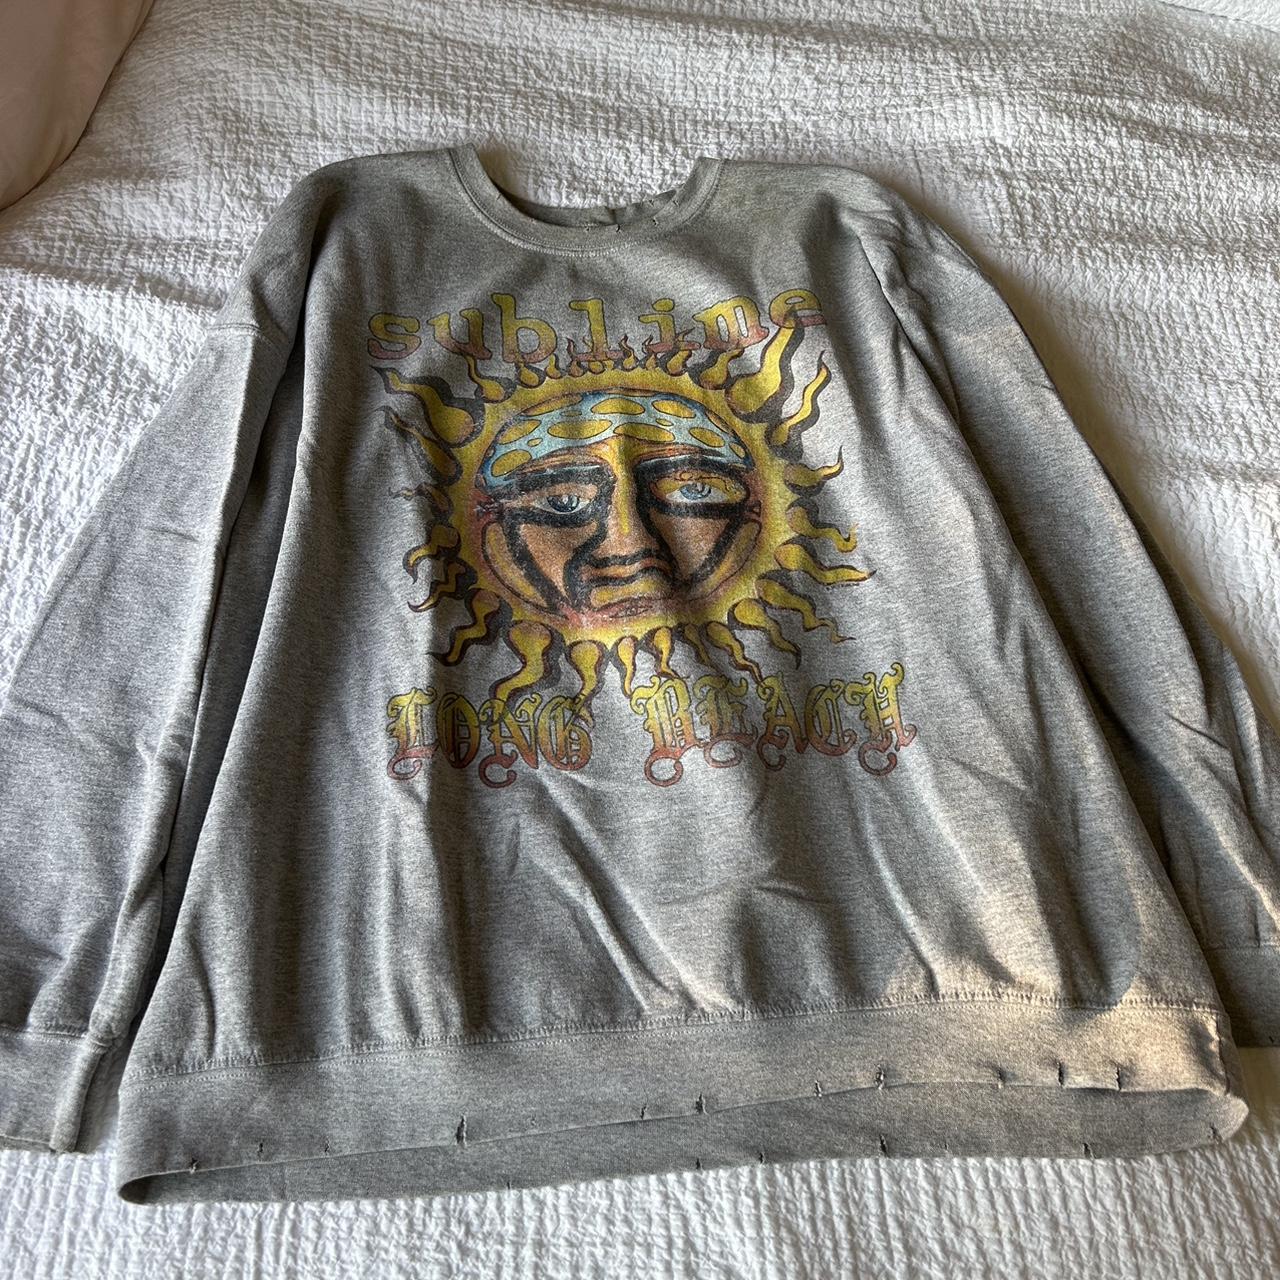 urban outfitters sublime sweatshirt size s/m oversized - Depop